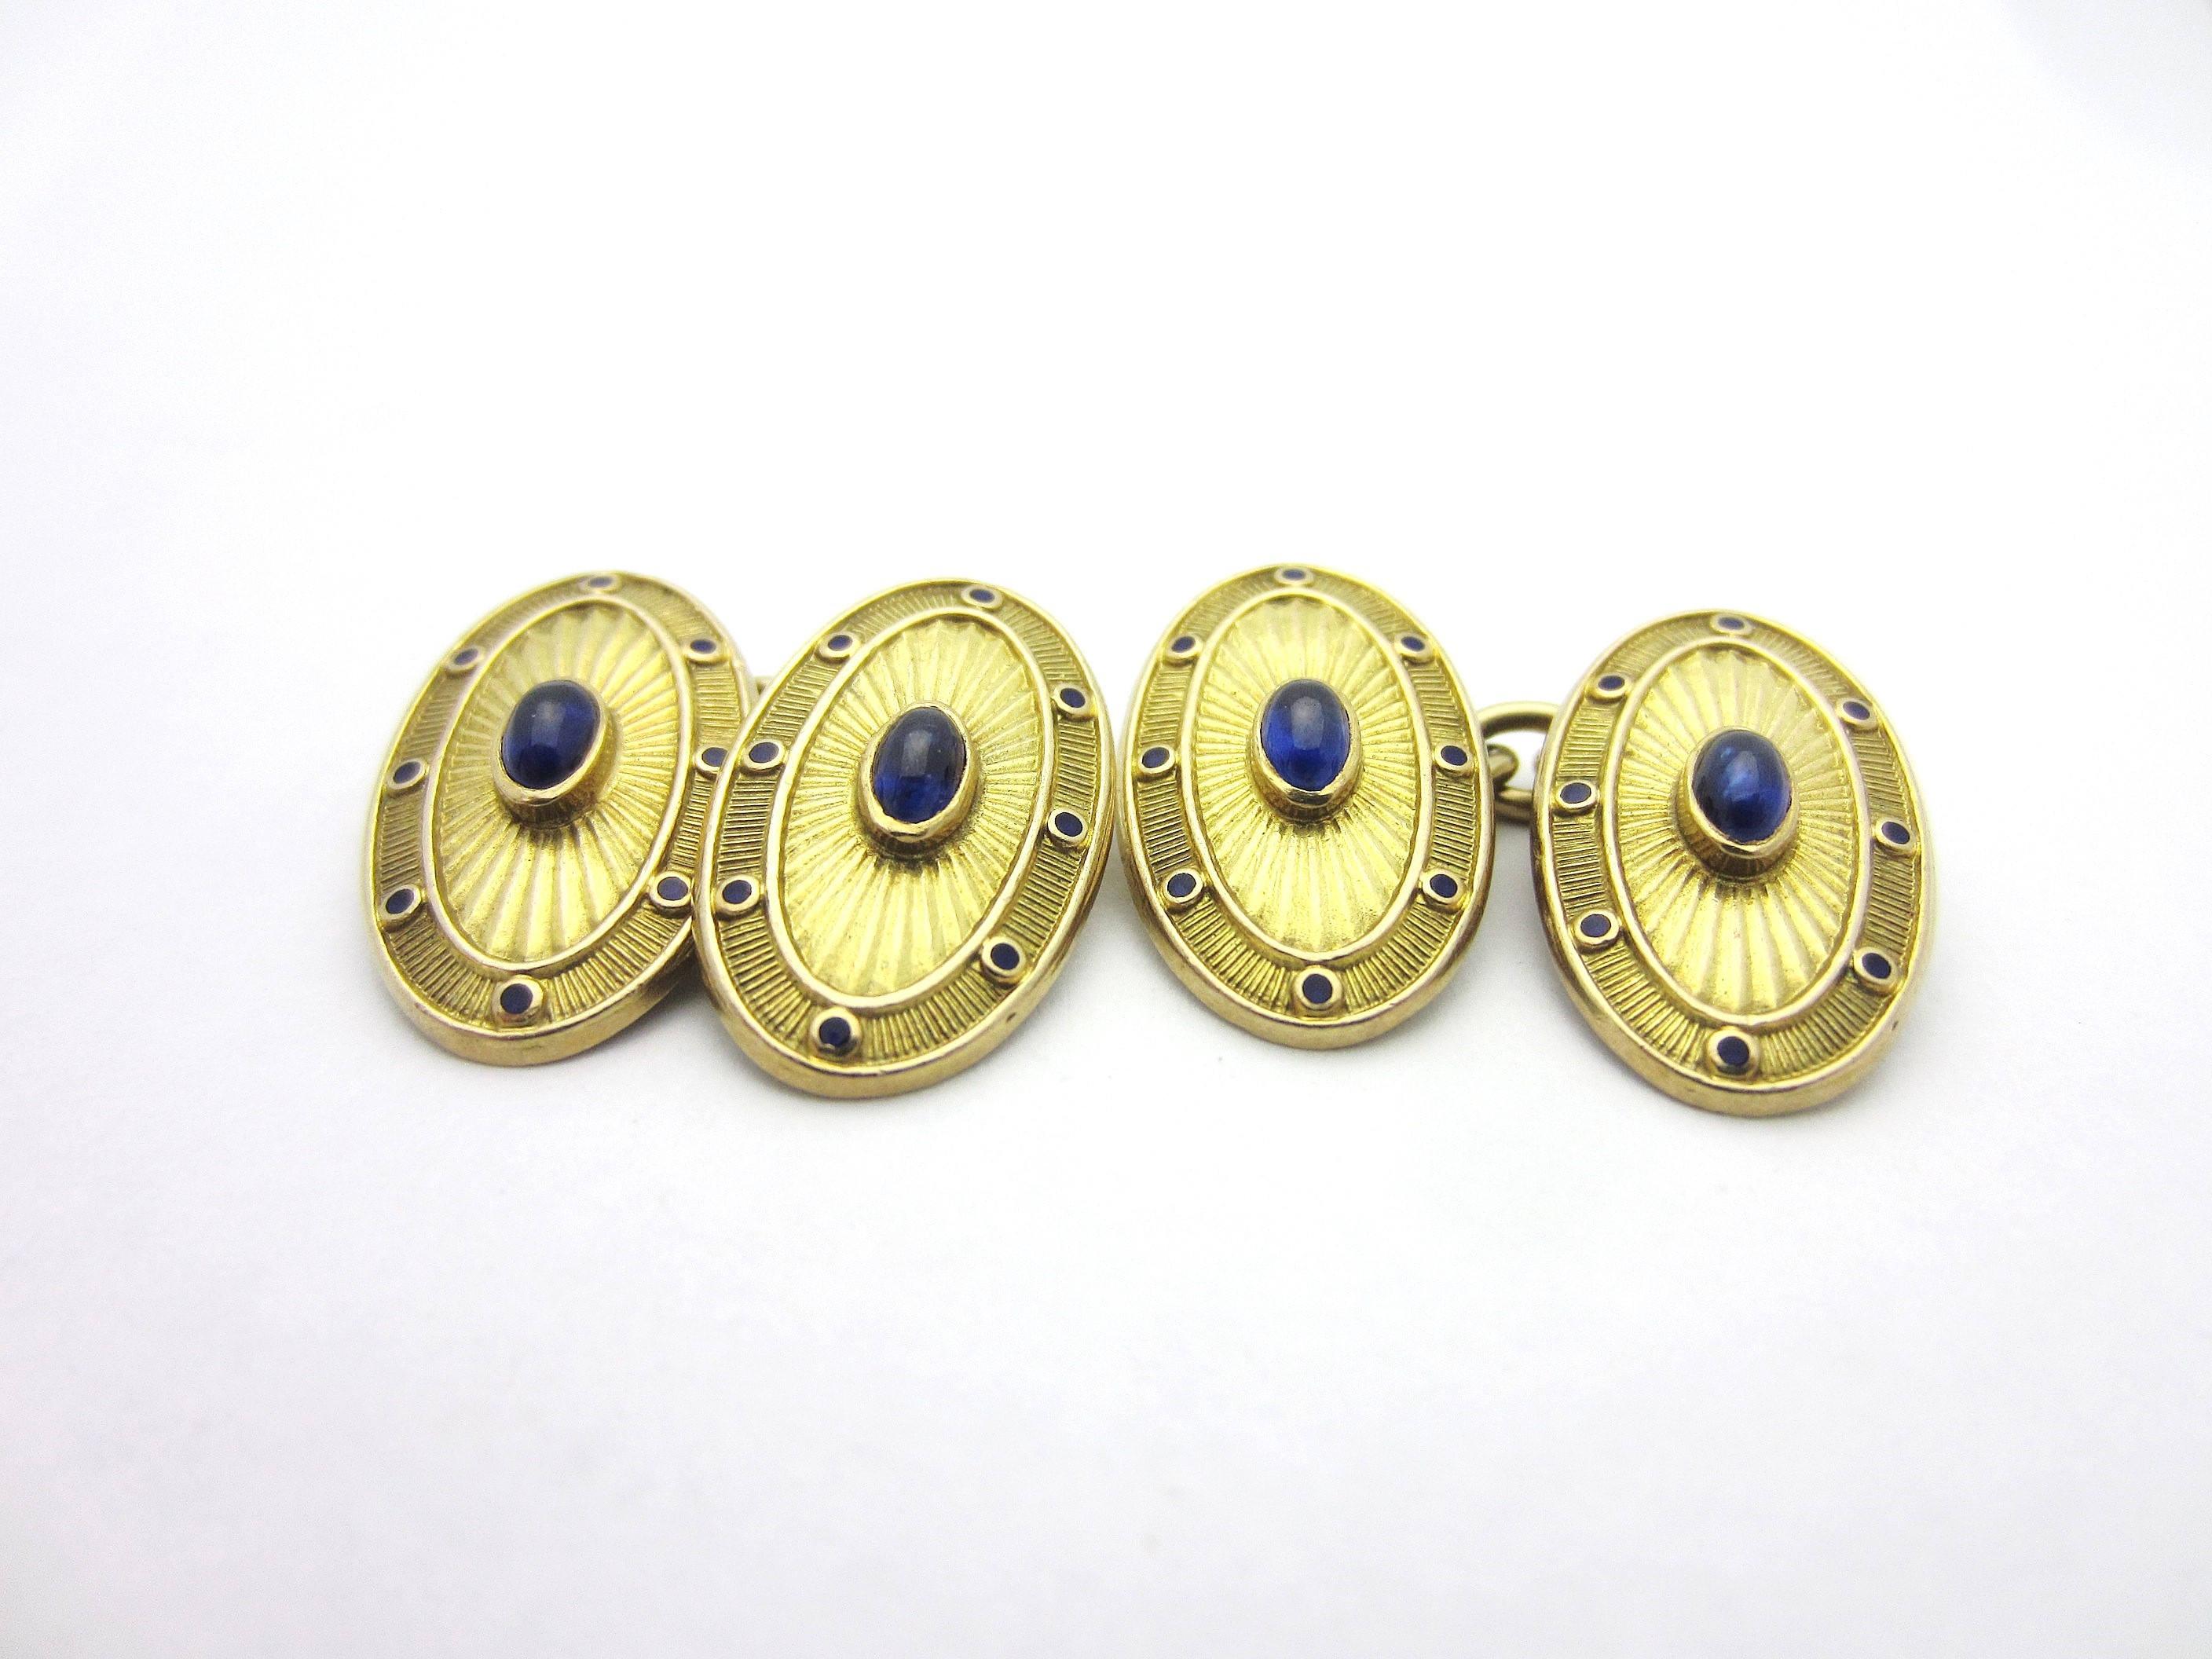 These incredible cufflinks by luxury British design house Deakin and Francis are a window into history.
This vintage pair of 18k yellow gold double-sided cufflinks features an oval face containing a natural blue sapphire cabochon. The gemstones are